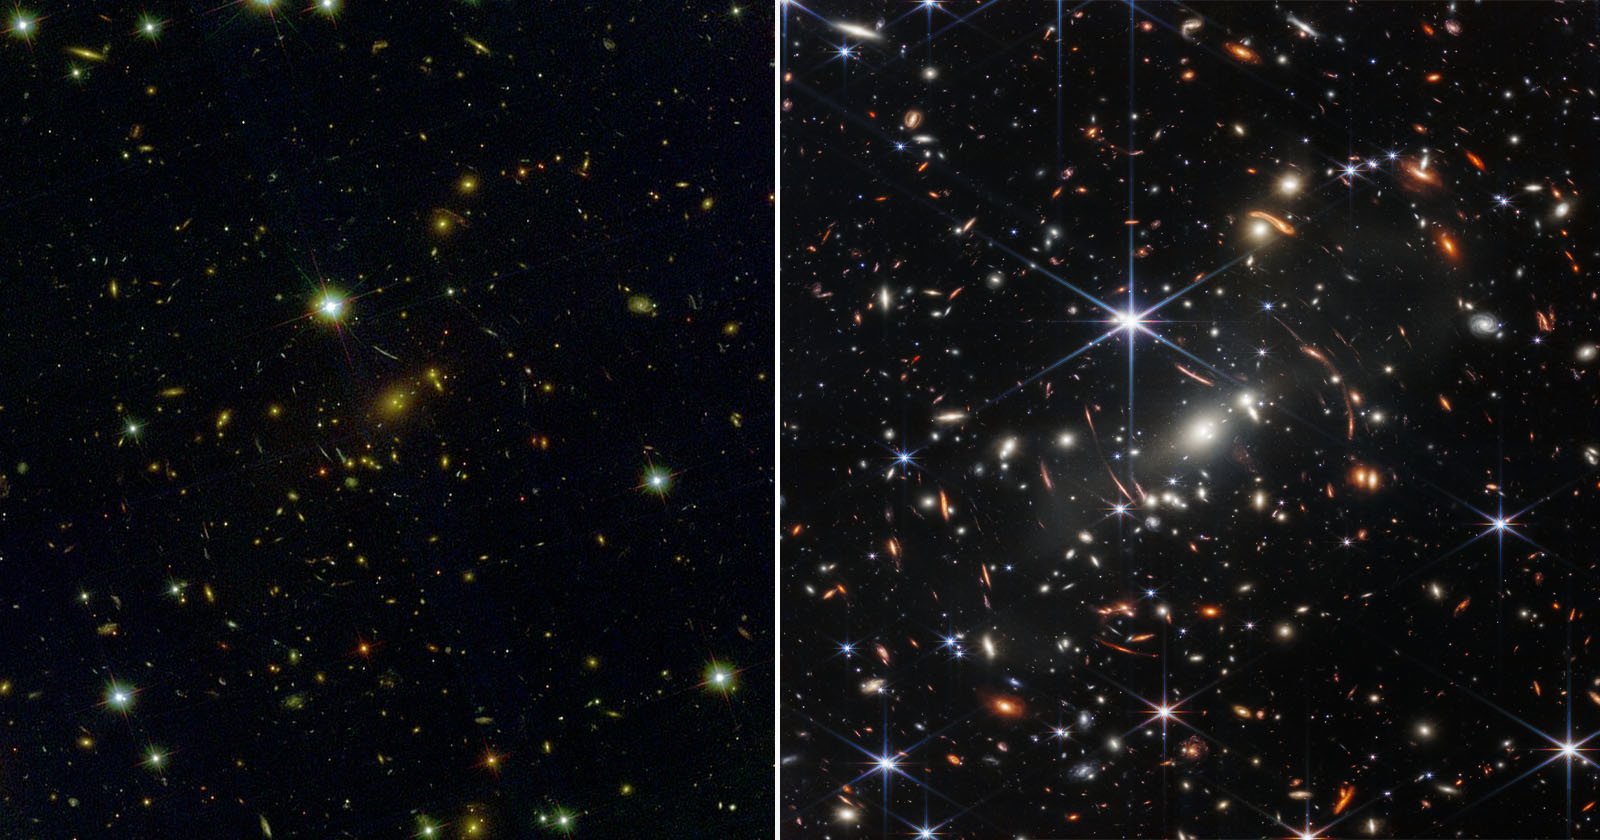 Comparing Hubble to James Webb: The Difference in Detail is Astounding